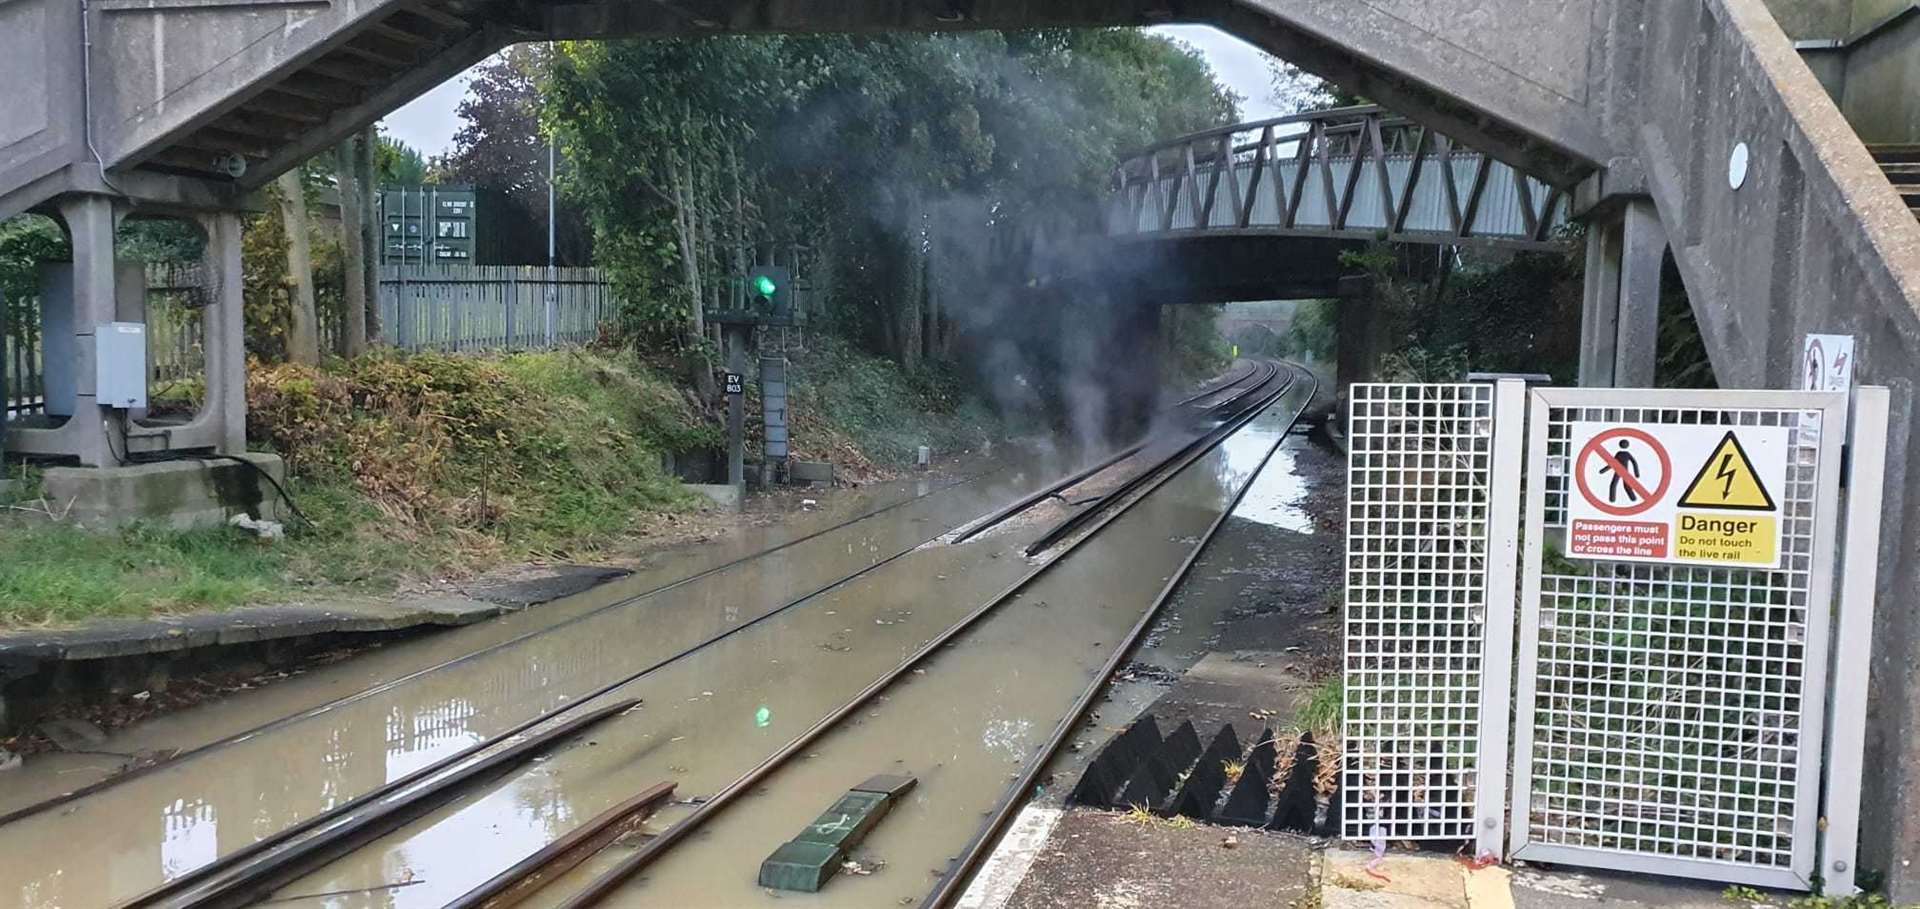 Smoke can be seen rising from the flooded tracks at Kemsely train station. Picture: Alex Matthews